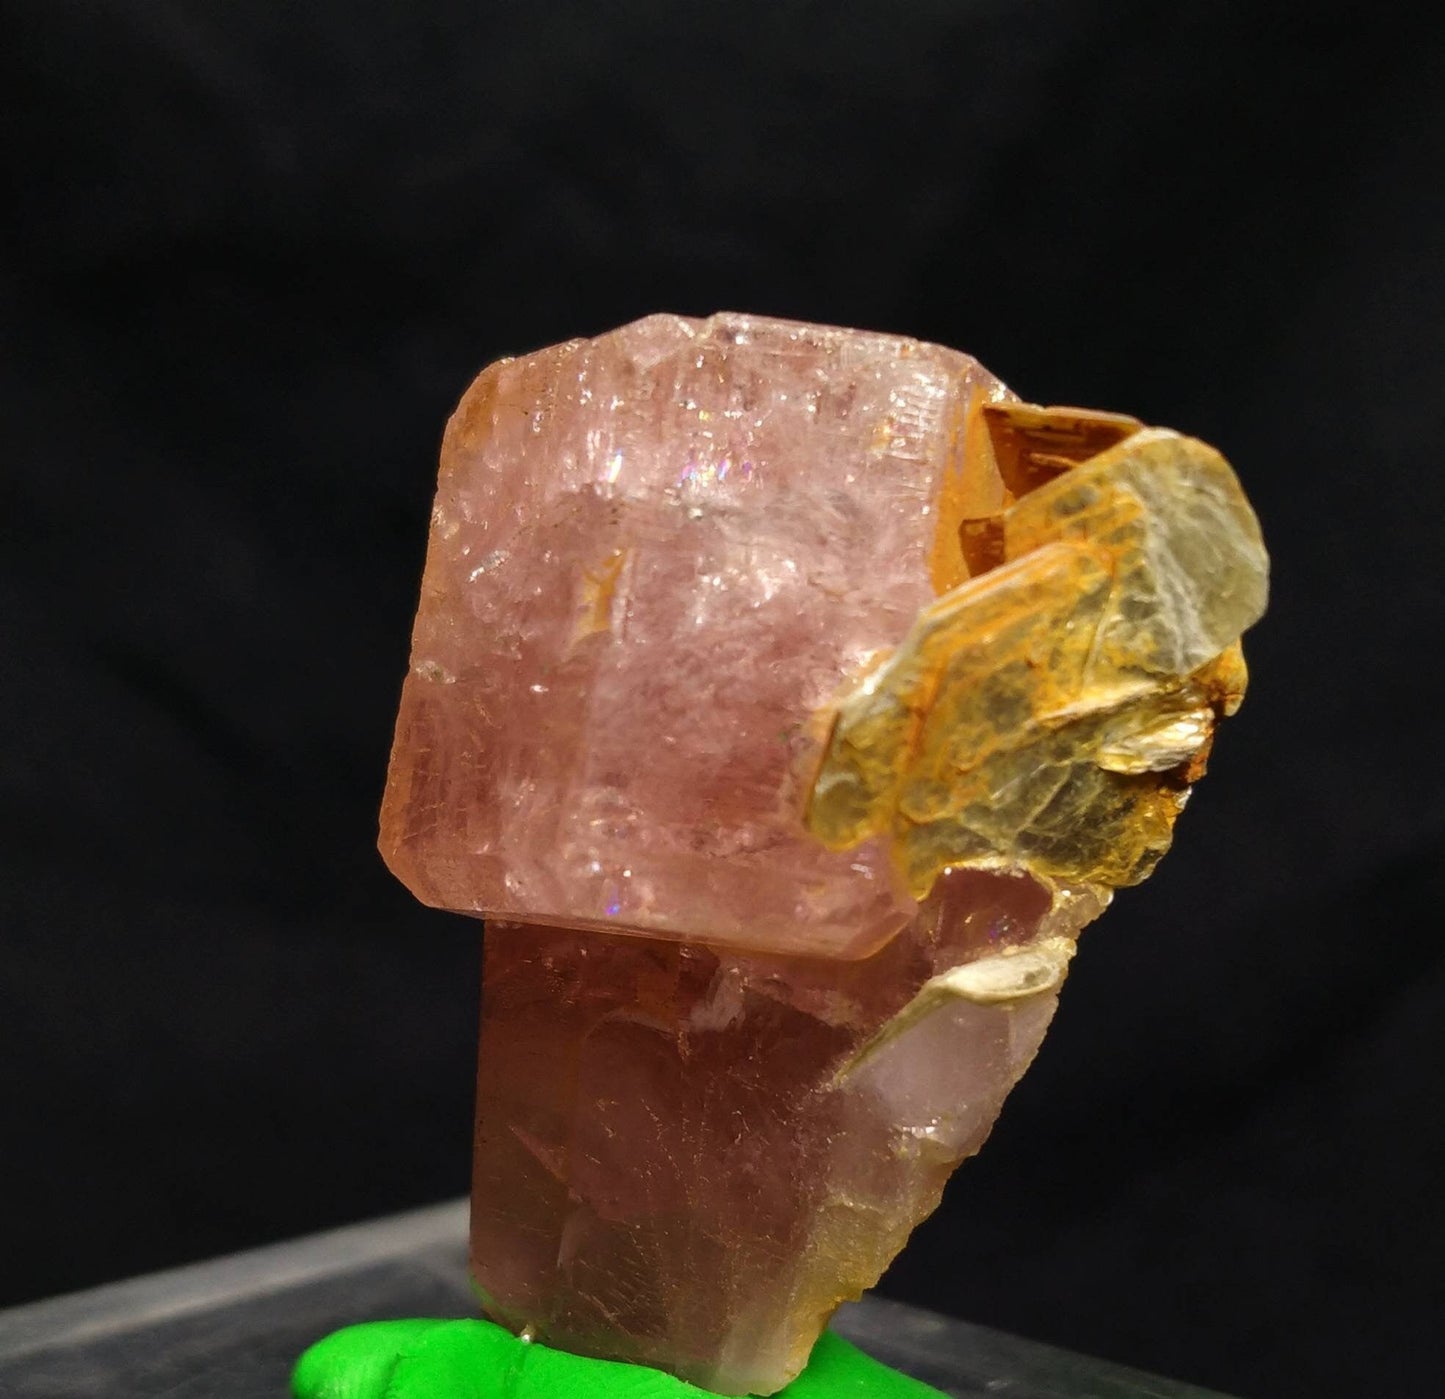 ARSAA GEMS AND MINERALSNice sized cluster 34.5 grams of lusterous hot pink apatite with muscovite mica Prestine condition - Premium  from ARSAA GEMS AND MINERALS - Just $300.00! Shop now at ARSAA GEMS AND MINERALS